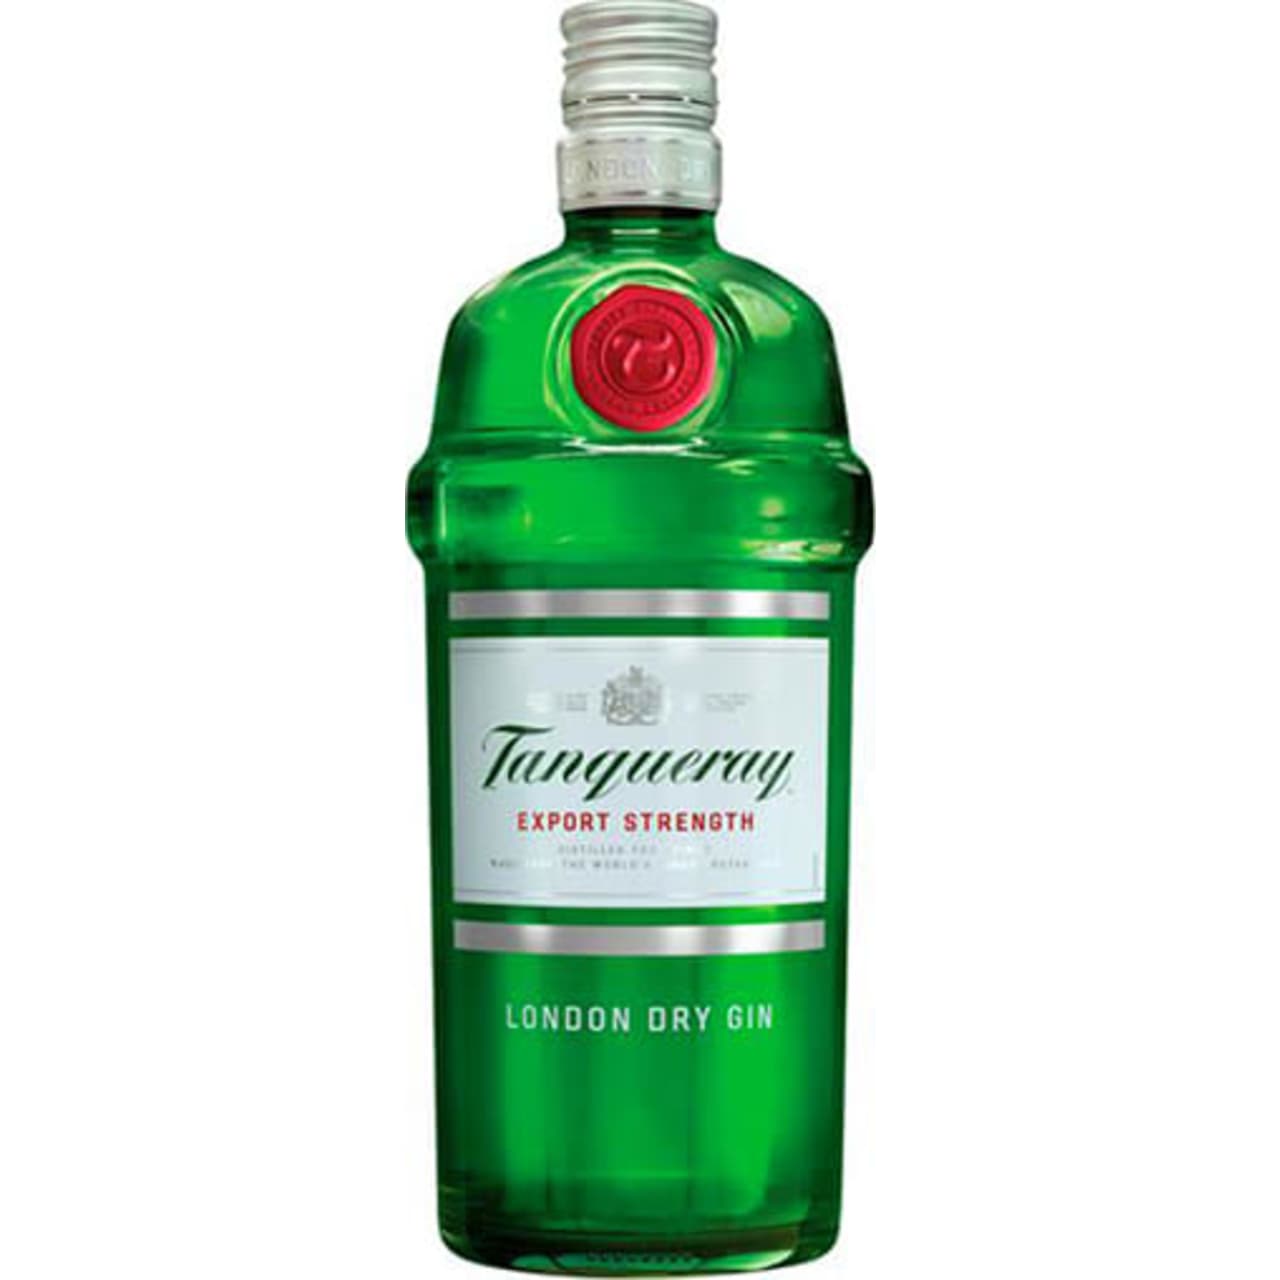 Tanqueray London Dry Gin is distilled four times and has the perfect balance of four classic gin botanicals - refreshing juniper, peppery coriander, aromatic angelica and sweet liquorice.